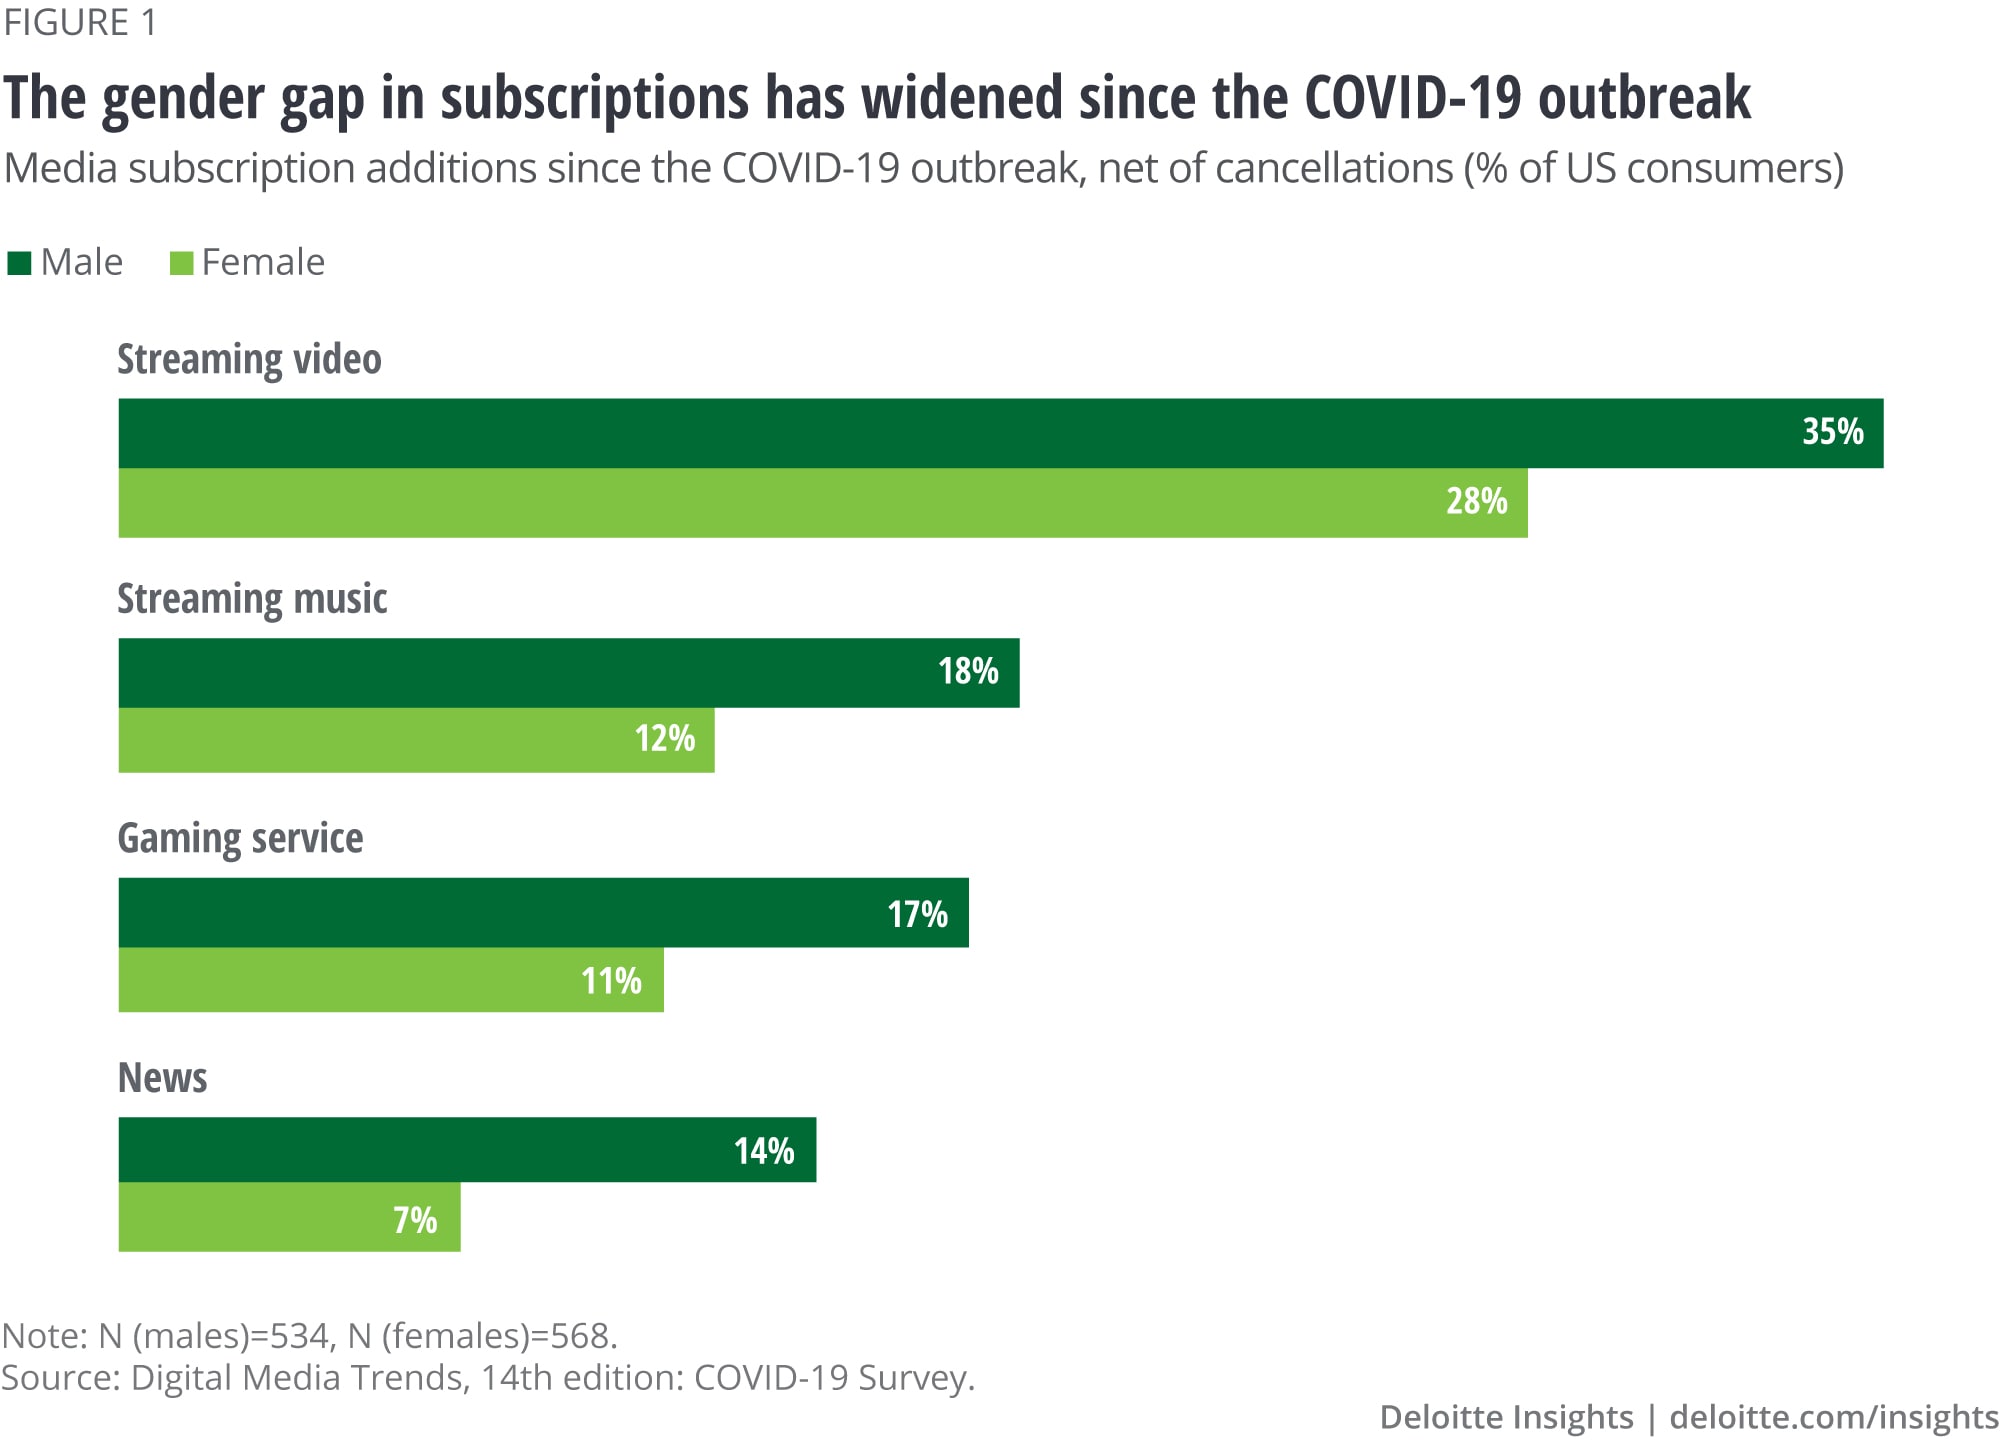 The gender gap in subscriptions has widened since COVID-19